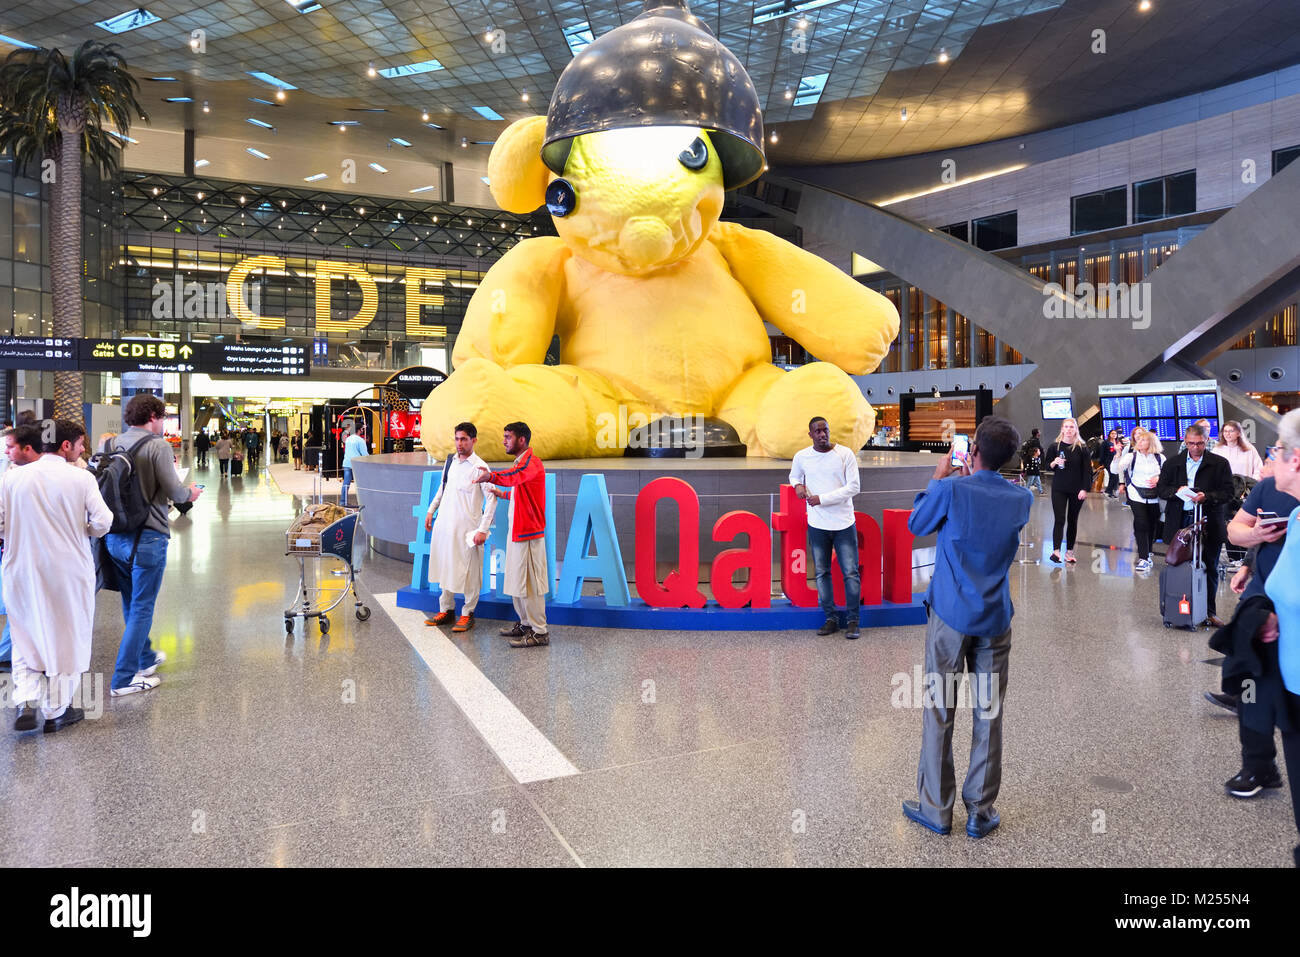 Qatar, Doha, Hamad International Airport. Within the transit area at the main lobby, visitors gather around the giant lamp bear for pictures. Stock Photo